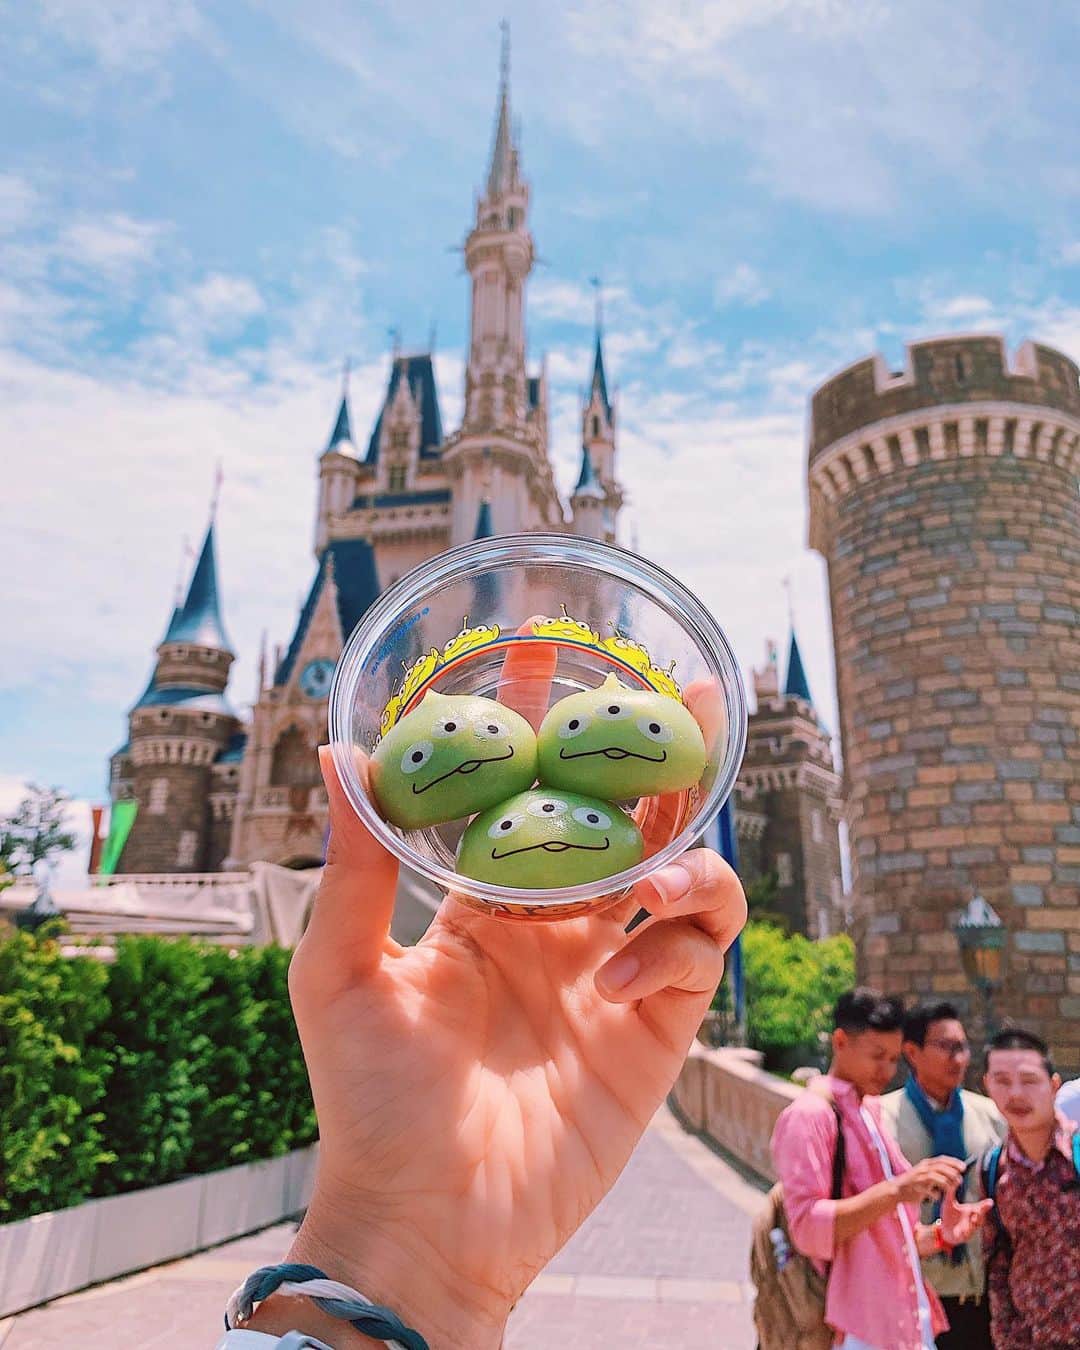 Girleatworldのインスタグラム：「The cute eats of Tokyo continues! Disneyland is the most magical place on earth, but Disneyland in Tokyo? 1000x better. They have super cute food and merchandise that you can only find exclusively in Tokyo Disneyland. One example is the Green Alien mochis from Toy Story. This is seriously THE CUTEST! I squealed when I saw this in person. They are basically three mochis (rice cake) balls shaped like the little green men in Toy Story. Each mochi has different fillings – strawberry, chocolate, and custard. Such a genius concept!  I've written a blog post on how to maximize your visit to Tokyo Disneyland. See the link on my profile!  #girleatworld #shotoniphone #iphonexsmax #disneyland #tokyo #tokyodisneyland #tokyodisneylandfood #greenalienmochi #toystory #toocutetoeat #tokyodisneyresort」